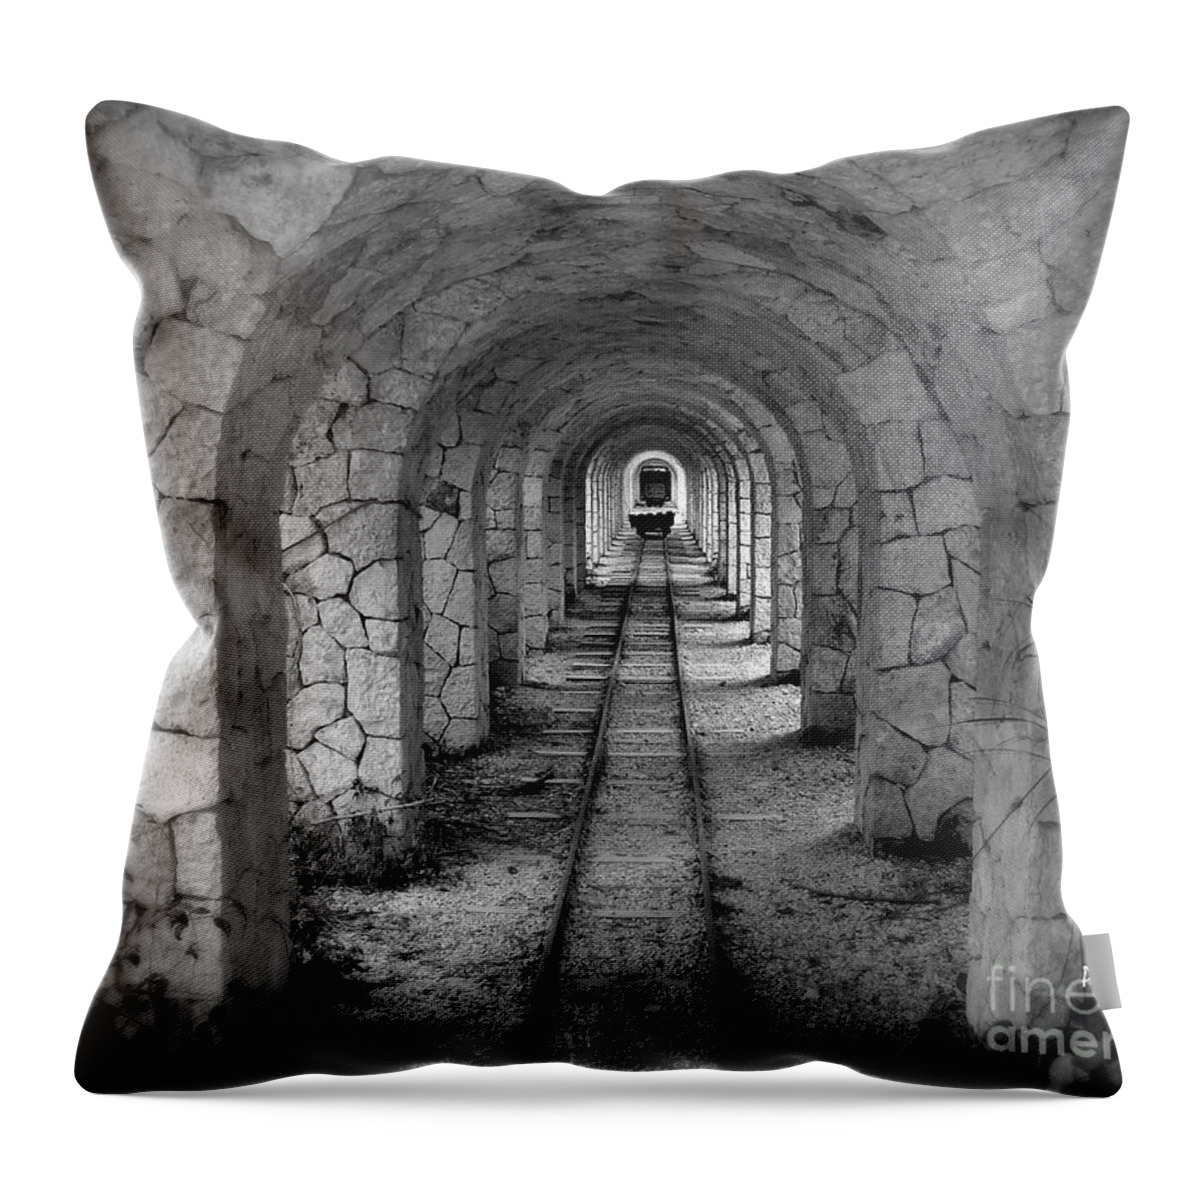 Arched Narrow Gauge Throw Pillow featuring the photograph Arched Narrow Gauge by Patrick Witz